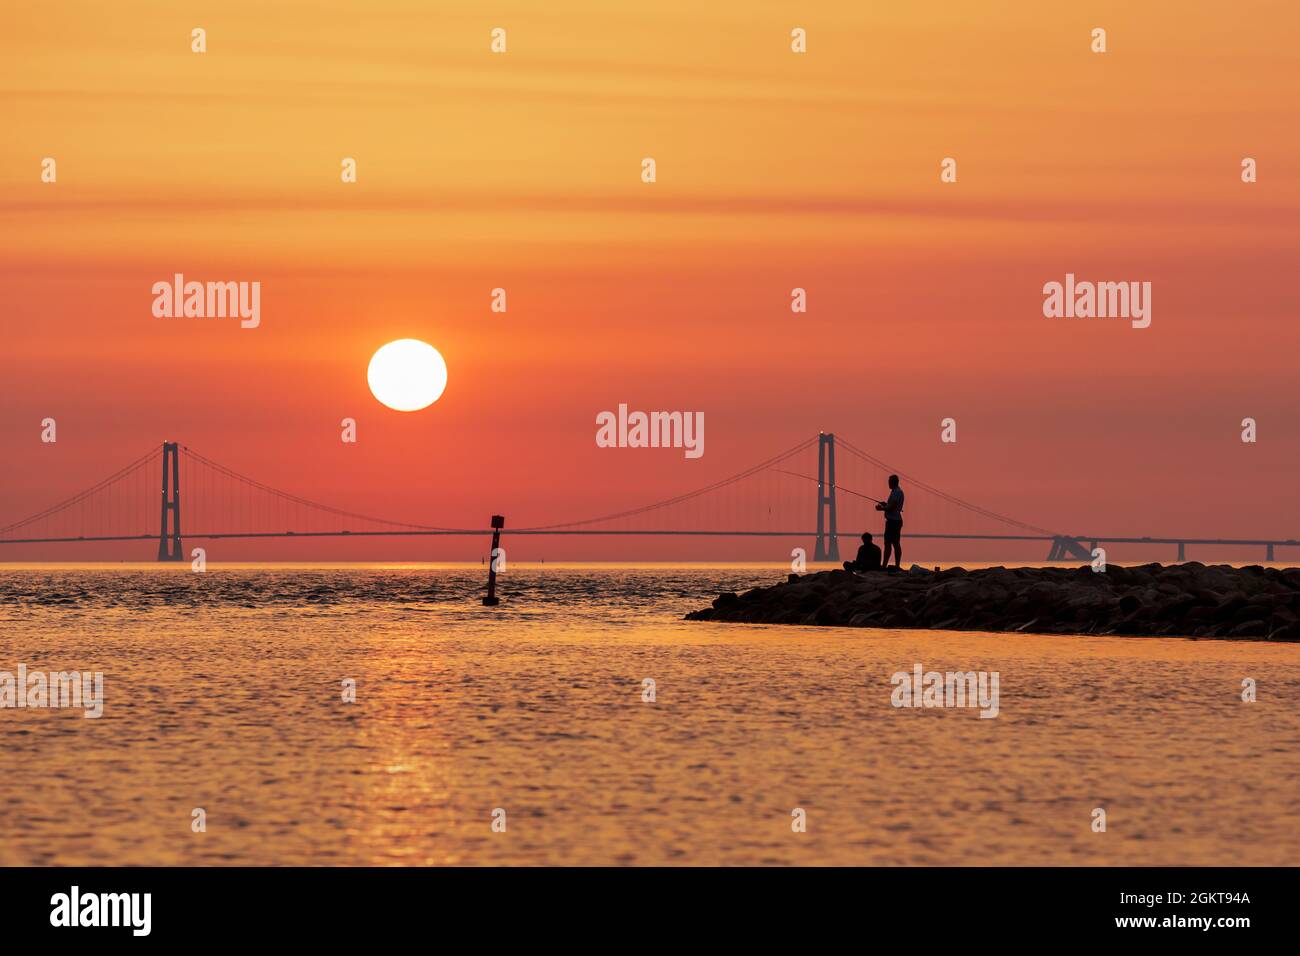 Silhouette of two men fishing with the Great Belt Bridge in the background, Denmark Stock Photo